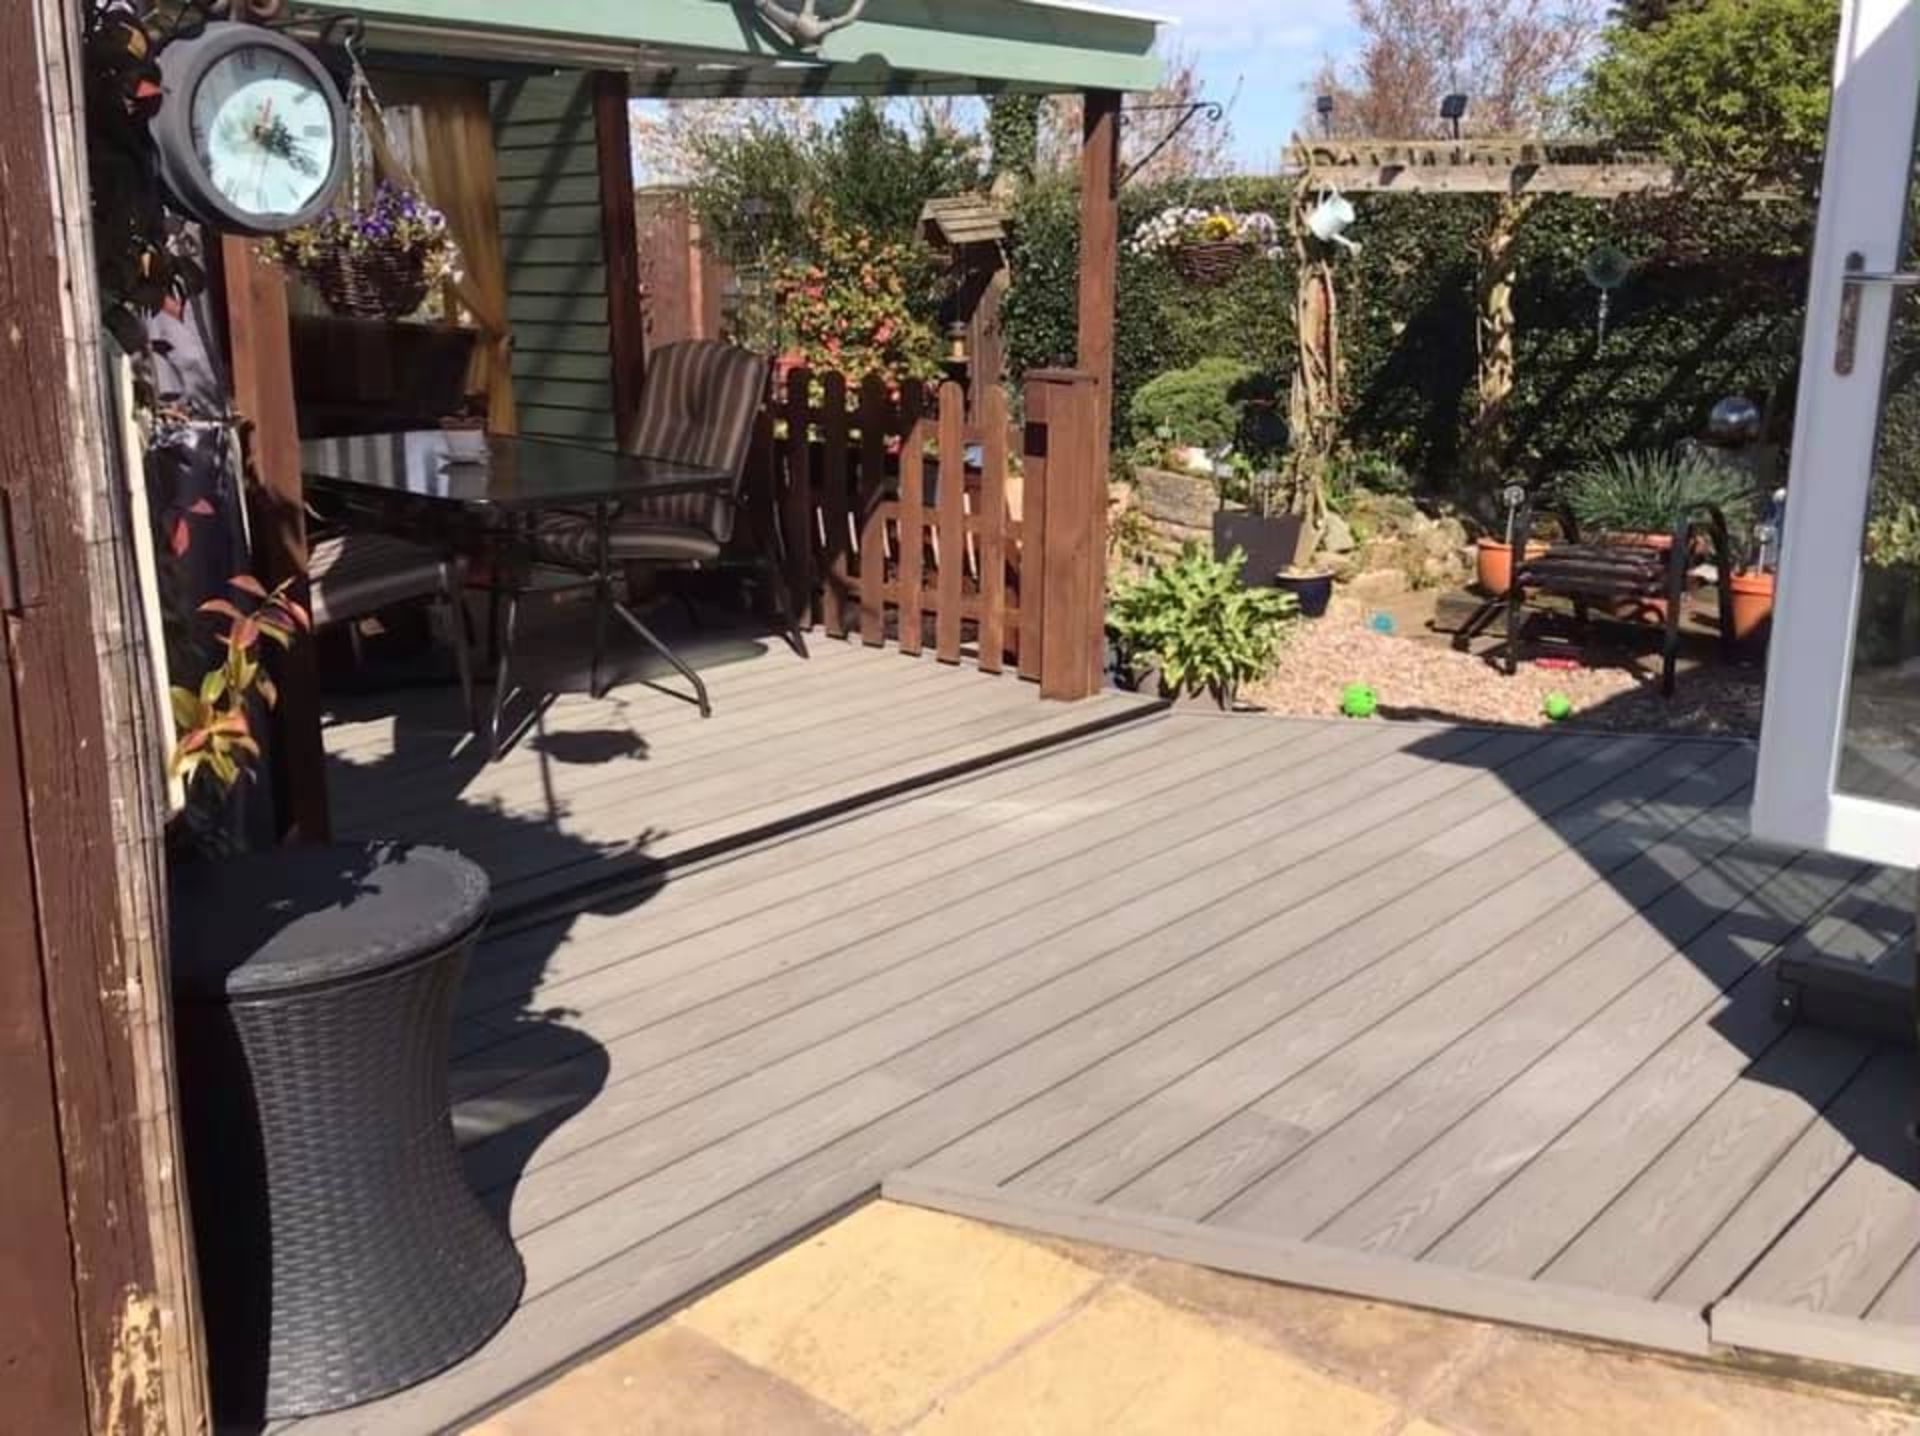 * 20 WPC Composite Light Grey Double sided Embossed Woodgrain Decking Boards 2900mm x 146mm x 25mm